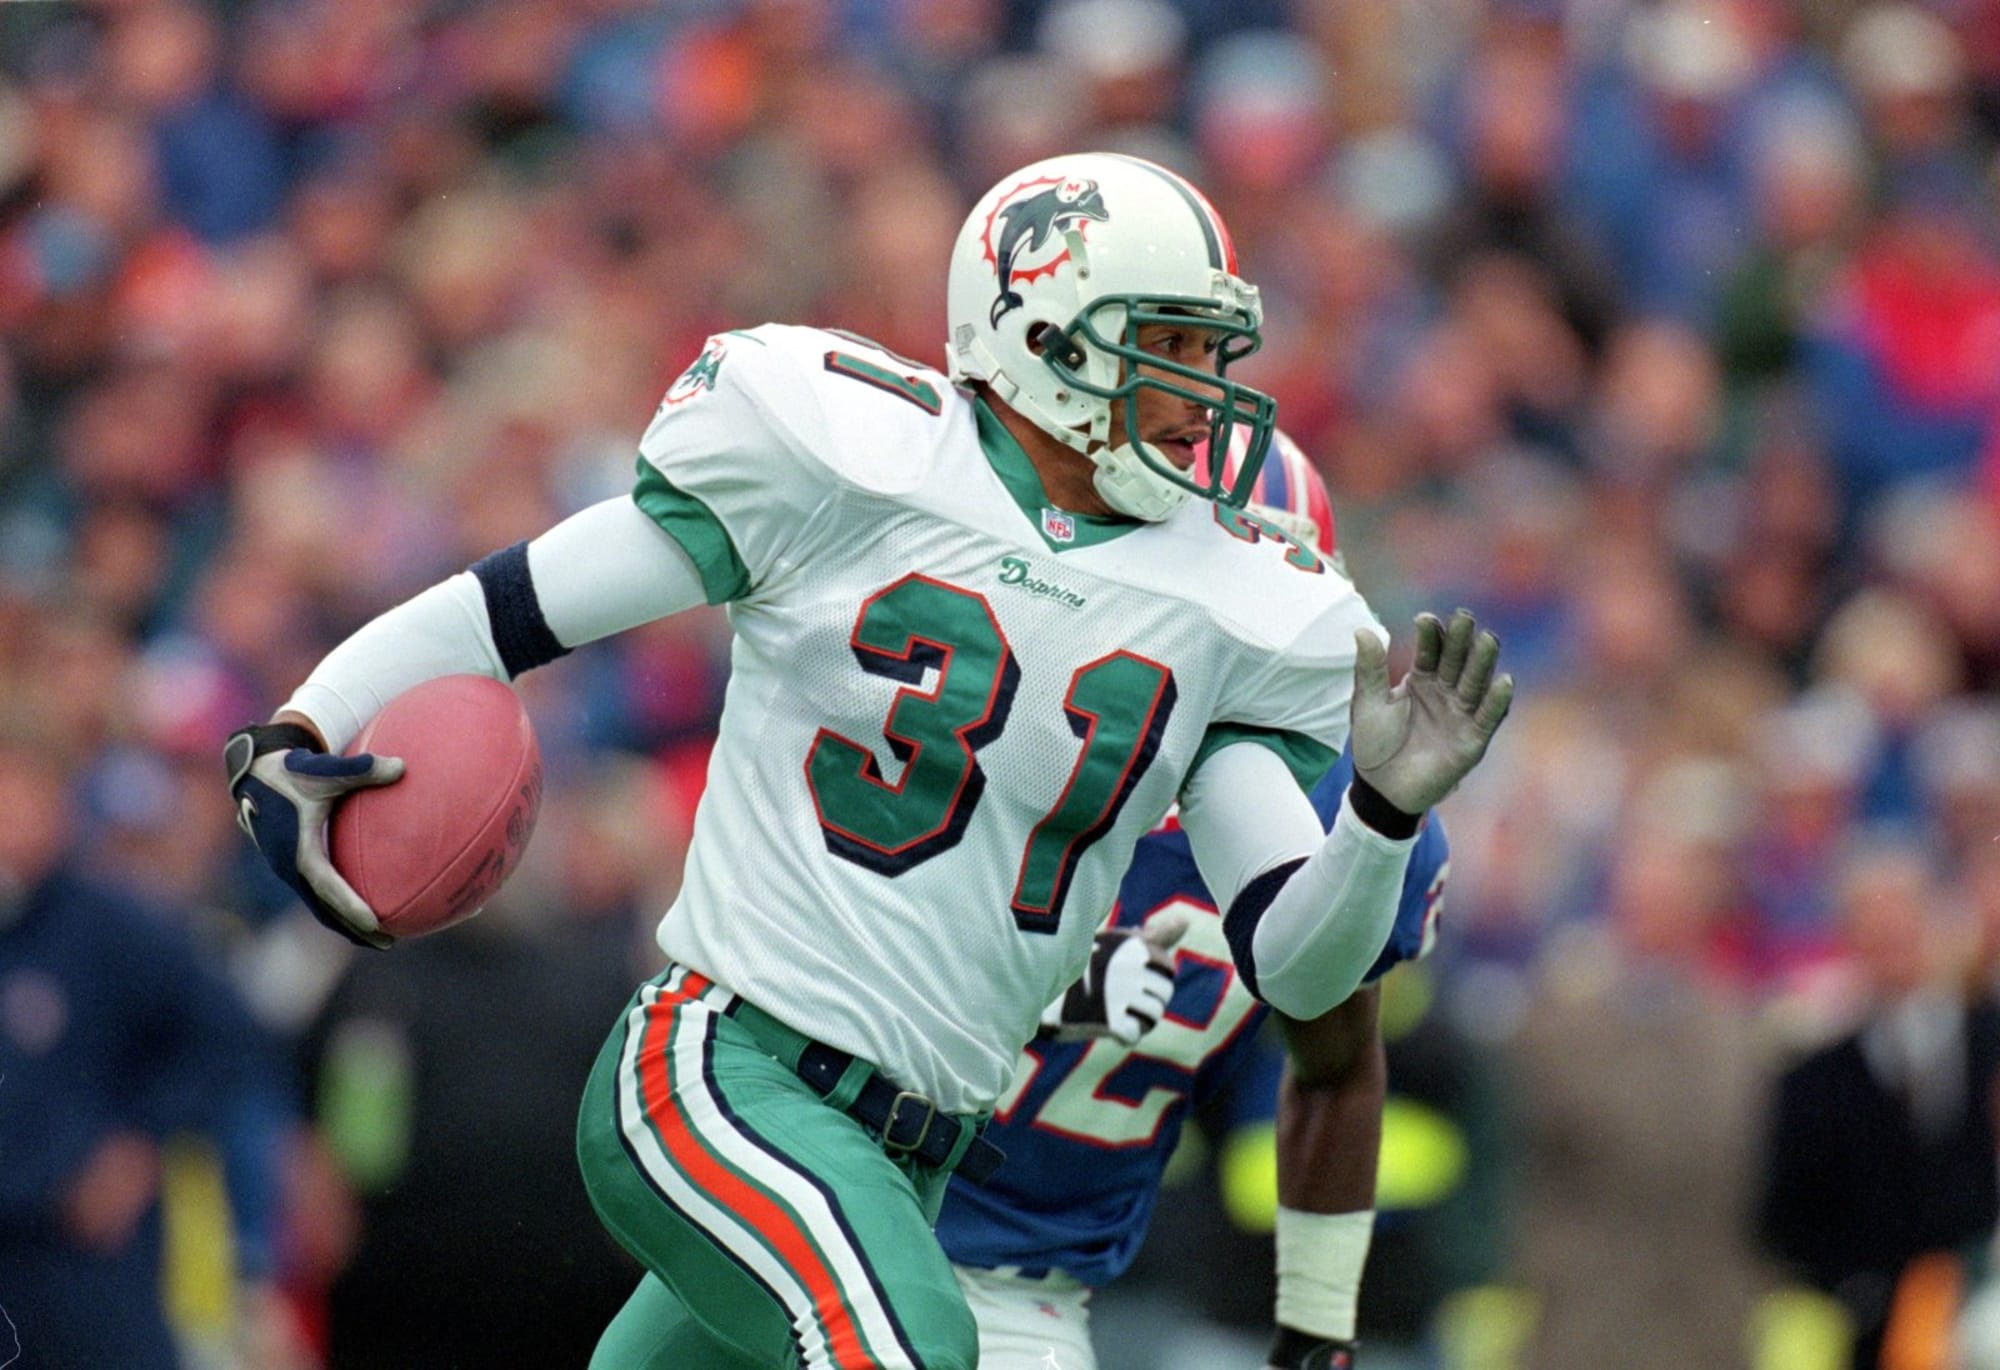 Brock Marion was the last truly talented Miami Dolphins free safety